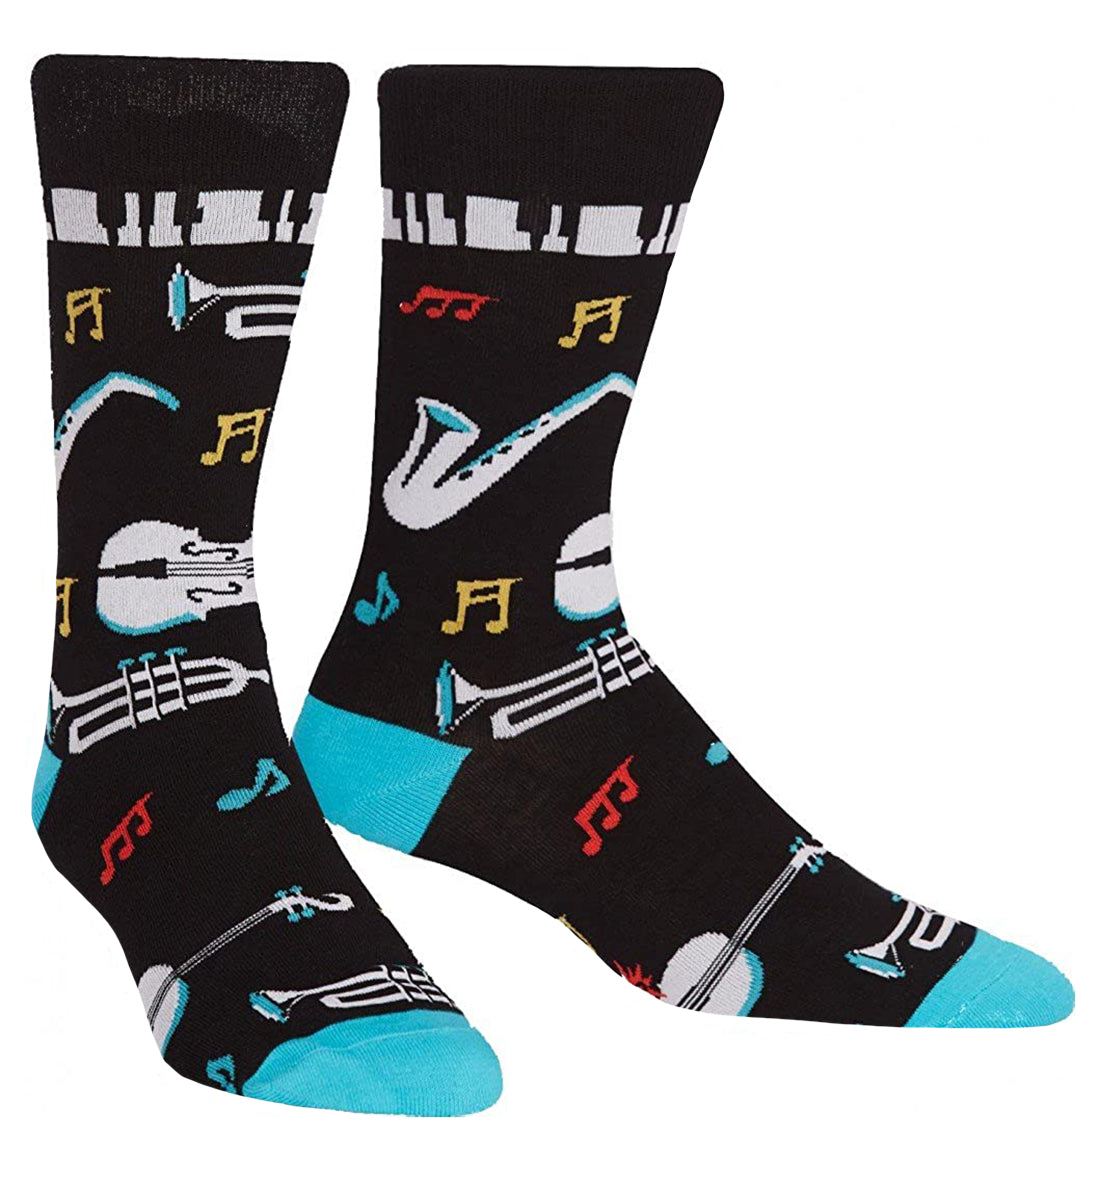 SOCK it to me Men's Crew Socks (mef0282),All That Jazz - All That Jazz,One Size